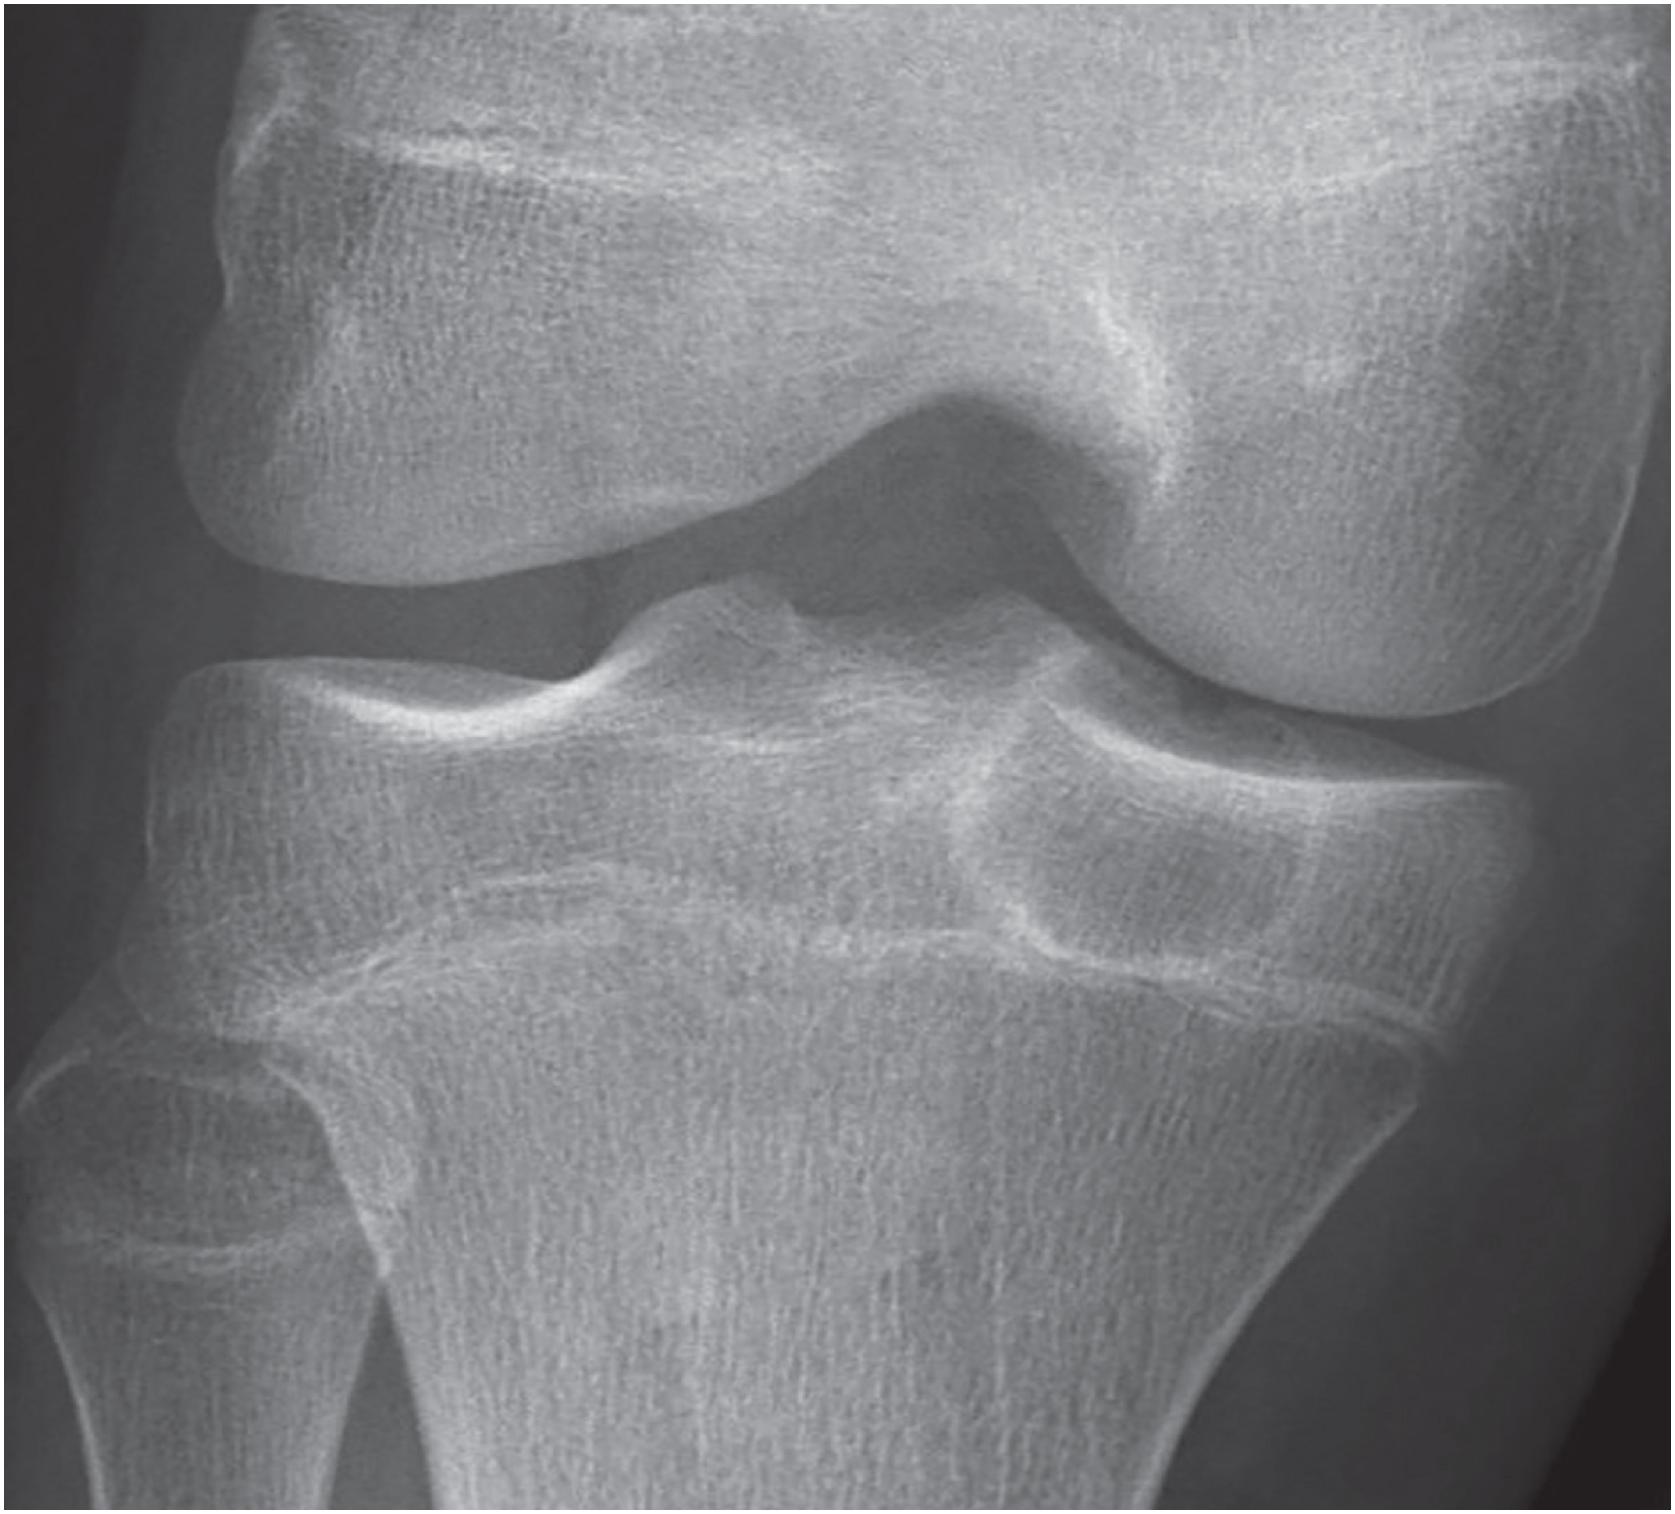 Fig. 17.32, Chondroblastoma is the prototypical epiphyseal lesion of skeletally immature individuals. This tibial epiphyseal lesion is lytic with a well-defined sclerotic margin.